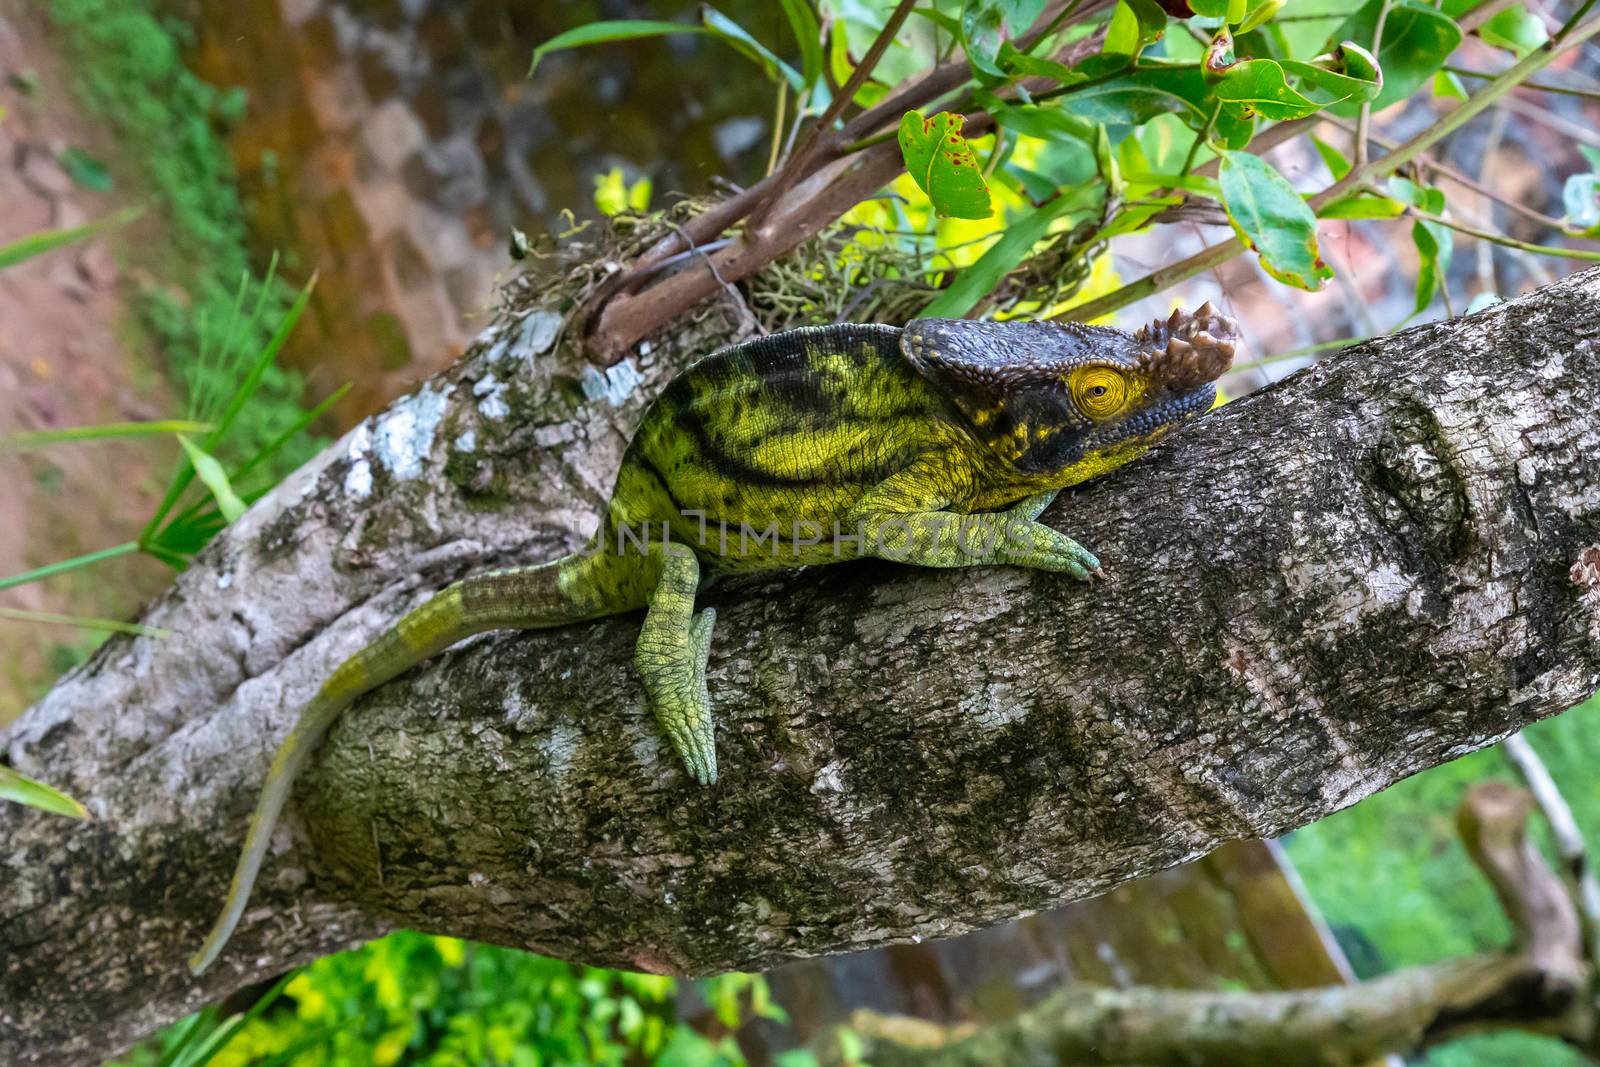 One chameleon moves along a branch in a rainforest in Madagascar